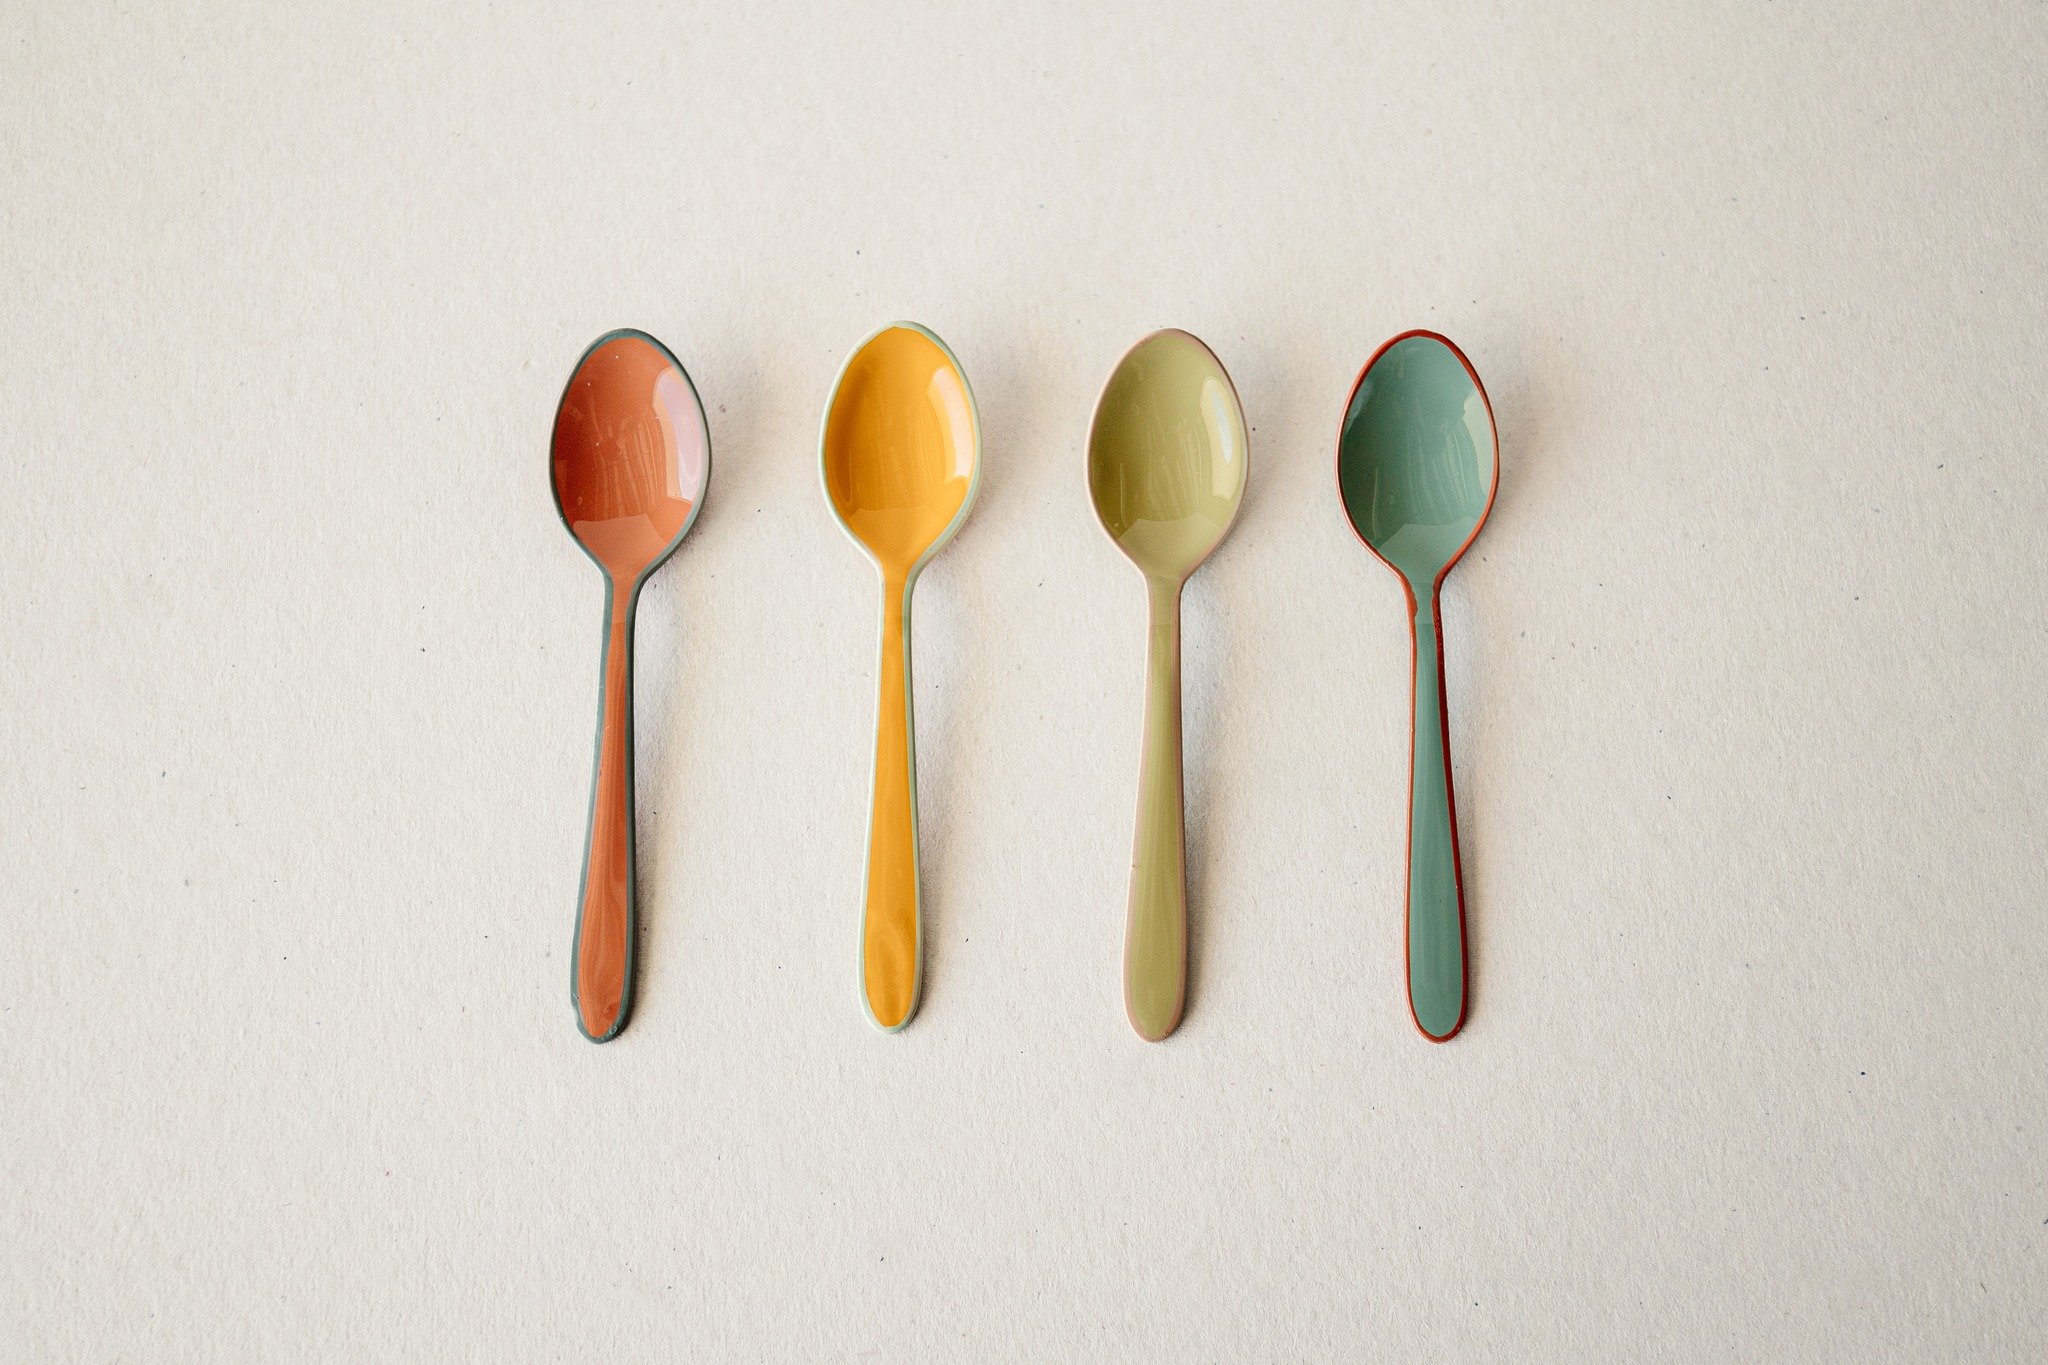 On a scale of 1 to 10 this enameled silverware collection is an 11! ☺️ They are intended to be for small bites and appetizers but when I first saw them at Market, I thought they would make great forks and spoons for little kids! Either way you use th